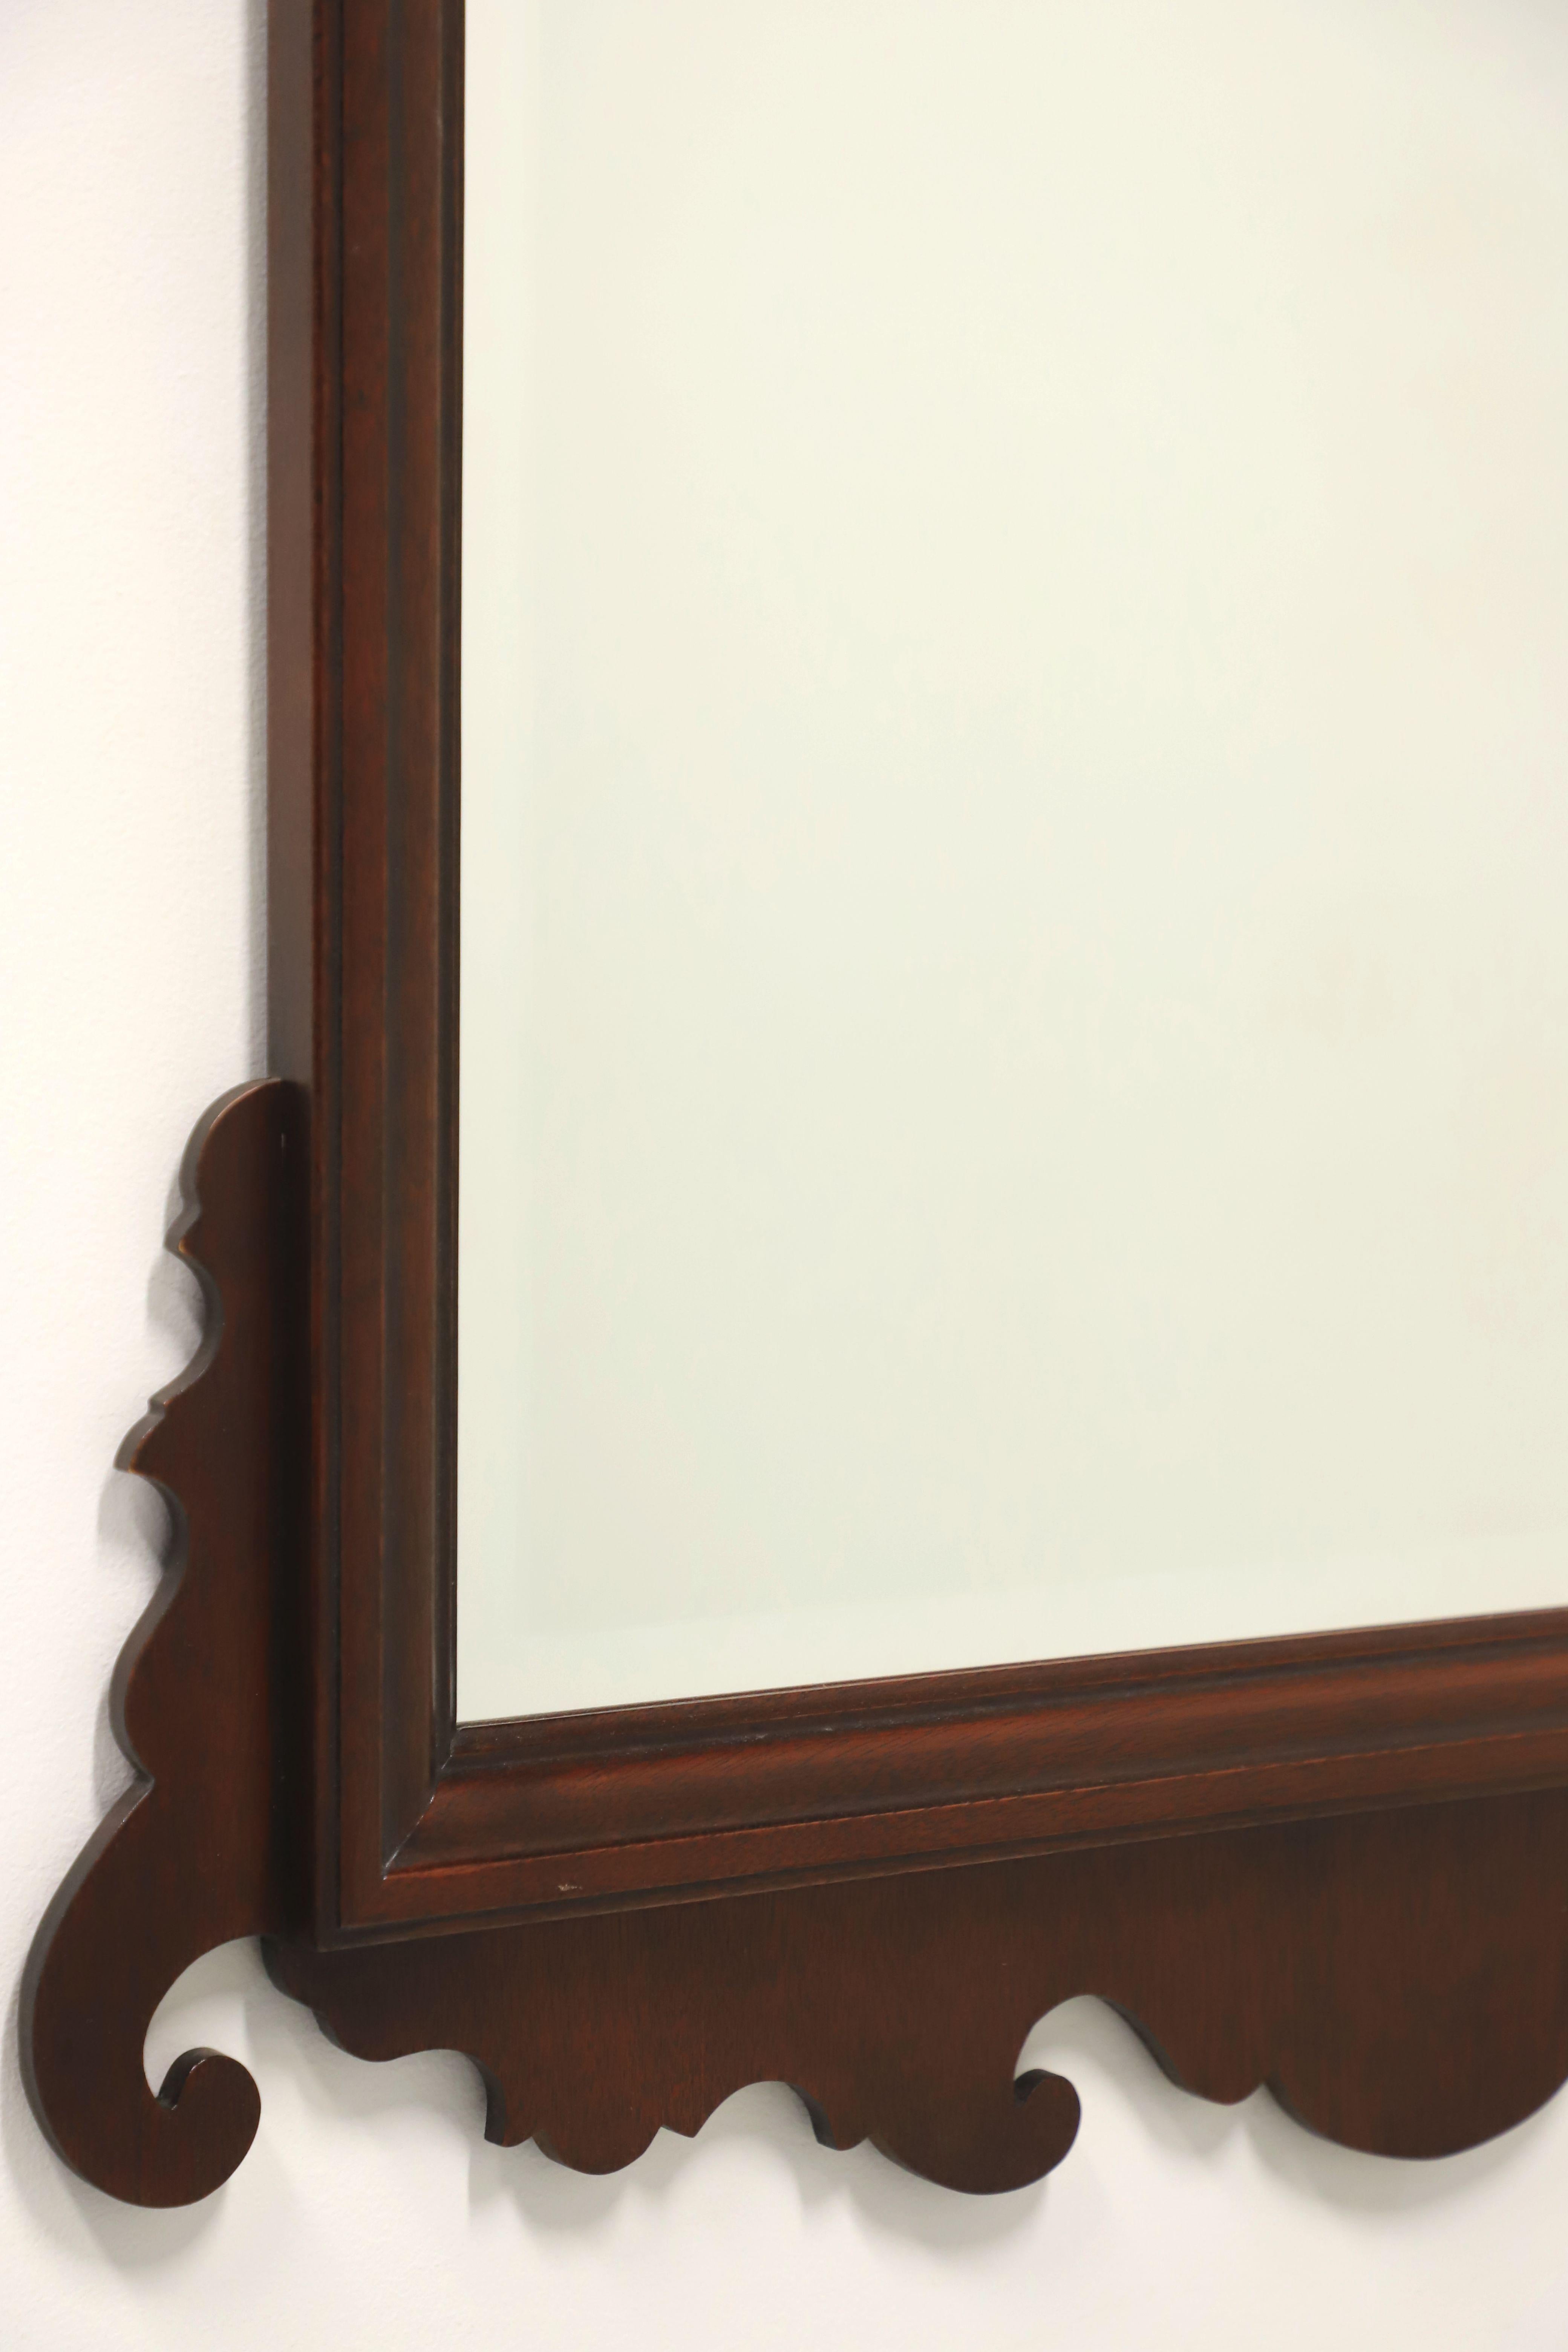 LINK-TAYLOR Heirloom Broken Arch Solid Mahogany Chippendale Beveled Wall Mirror For Sale 1